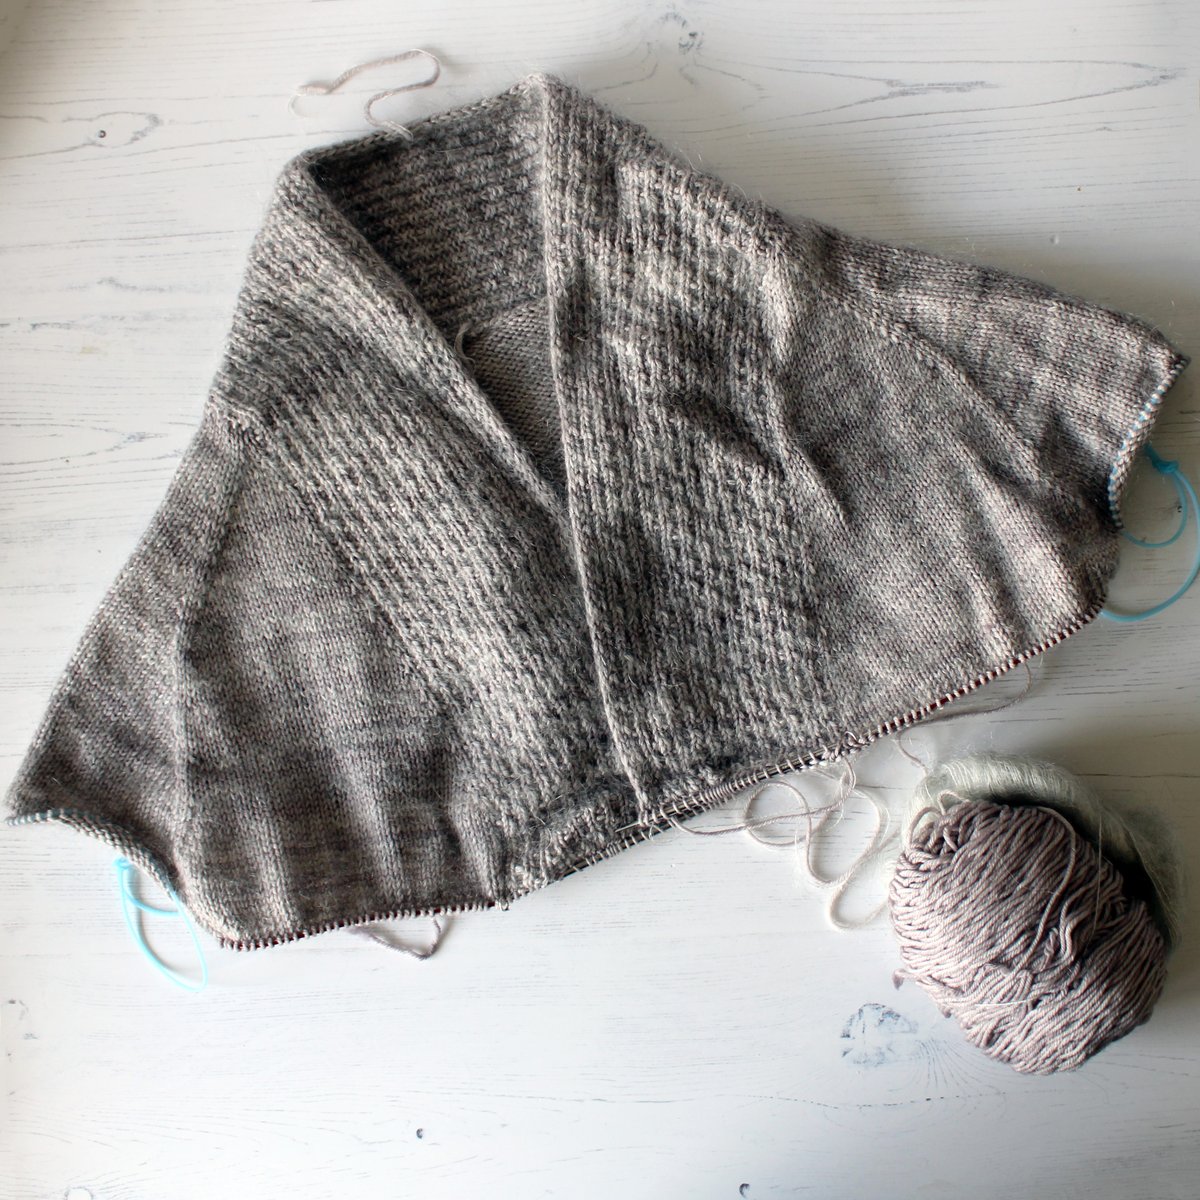 Another project from my WIP pile today! This one is my Beau B cardigan. I really love the pattern, but not the mohair. I've started it again without the mohair, but I haven't made much progress yet! 

#BeauBCardigan #LaMaisonRililie #Knitting